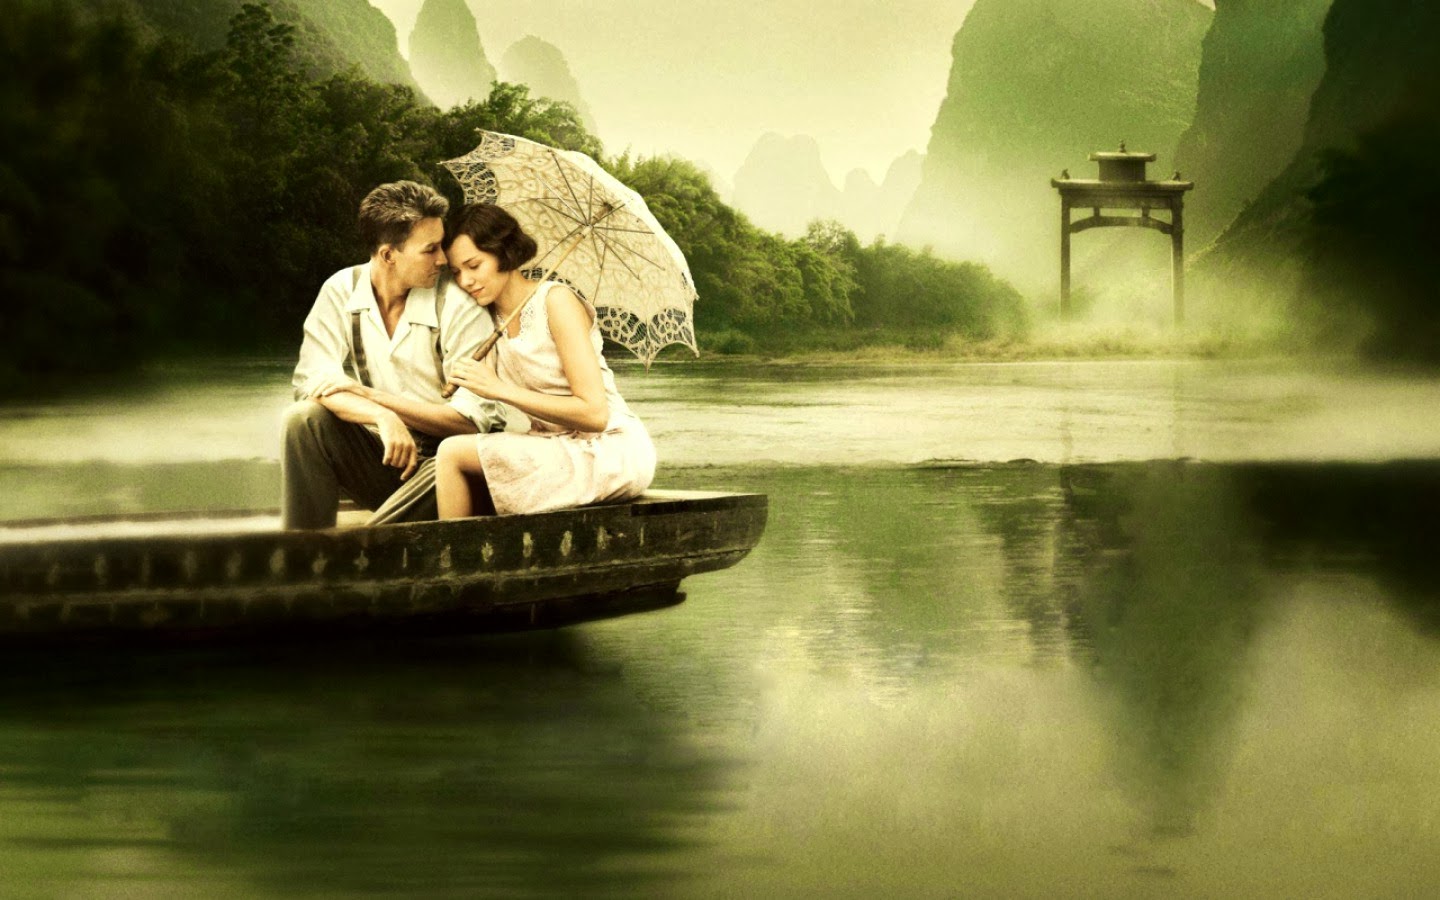 Missing Beats of Life Romantic Couple HD Wallpaper and Image